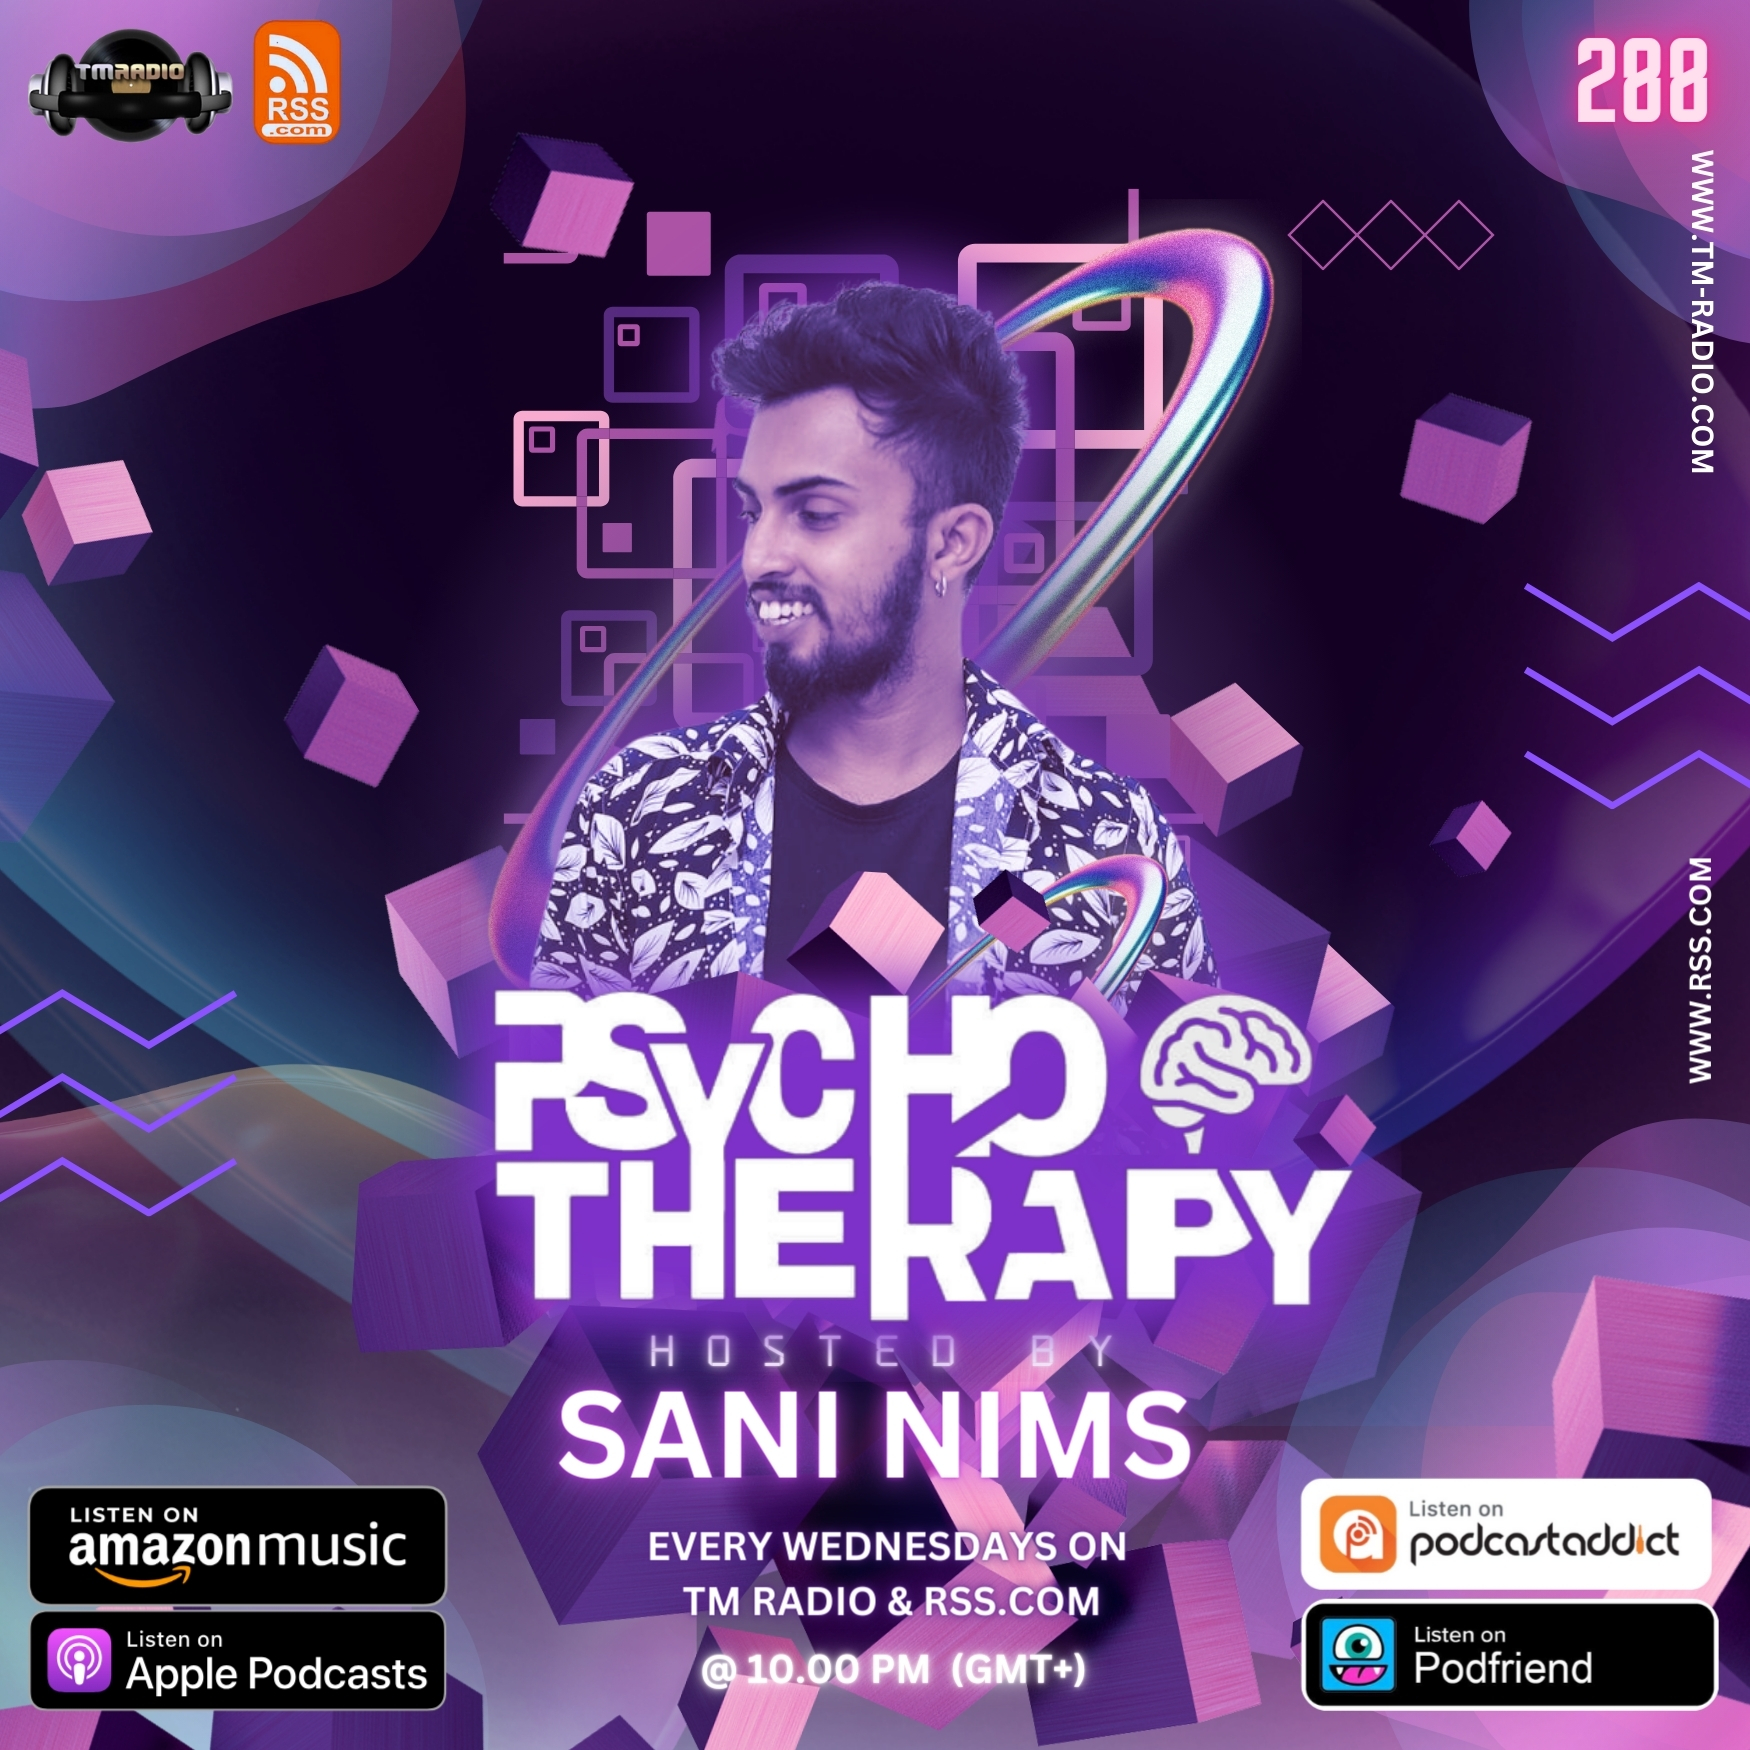 PSYCHO THERAPY EP 288 BY SANI NIMS ON TM RADIO (from April 24th)